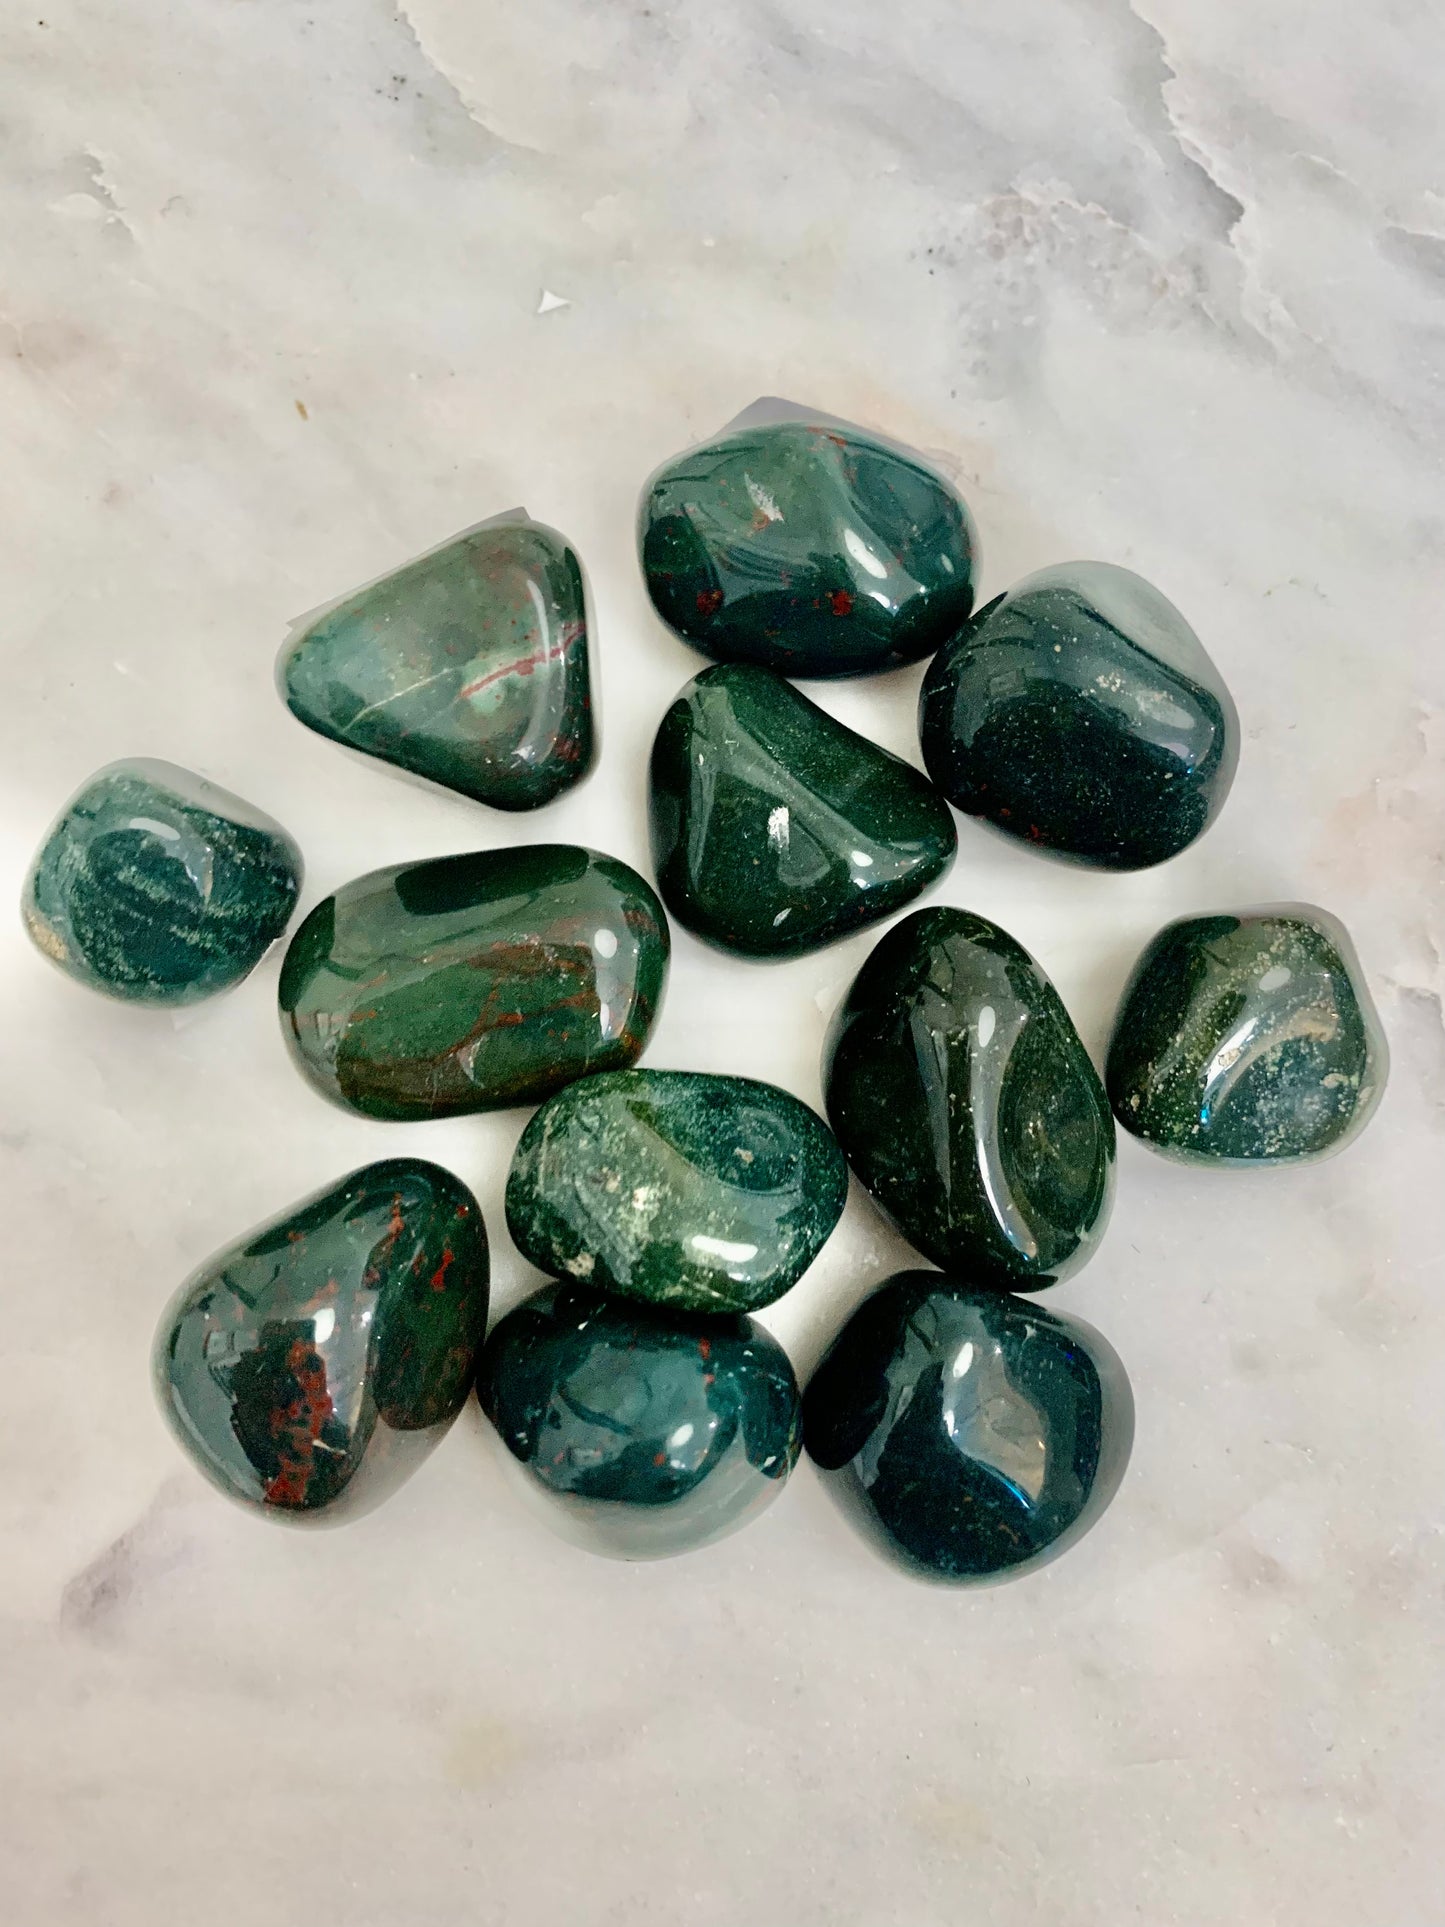 Tumbled Bloodstone Crystals